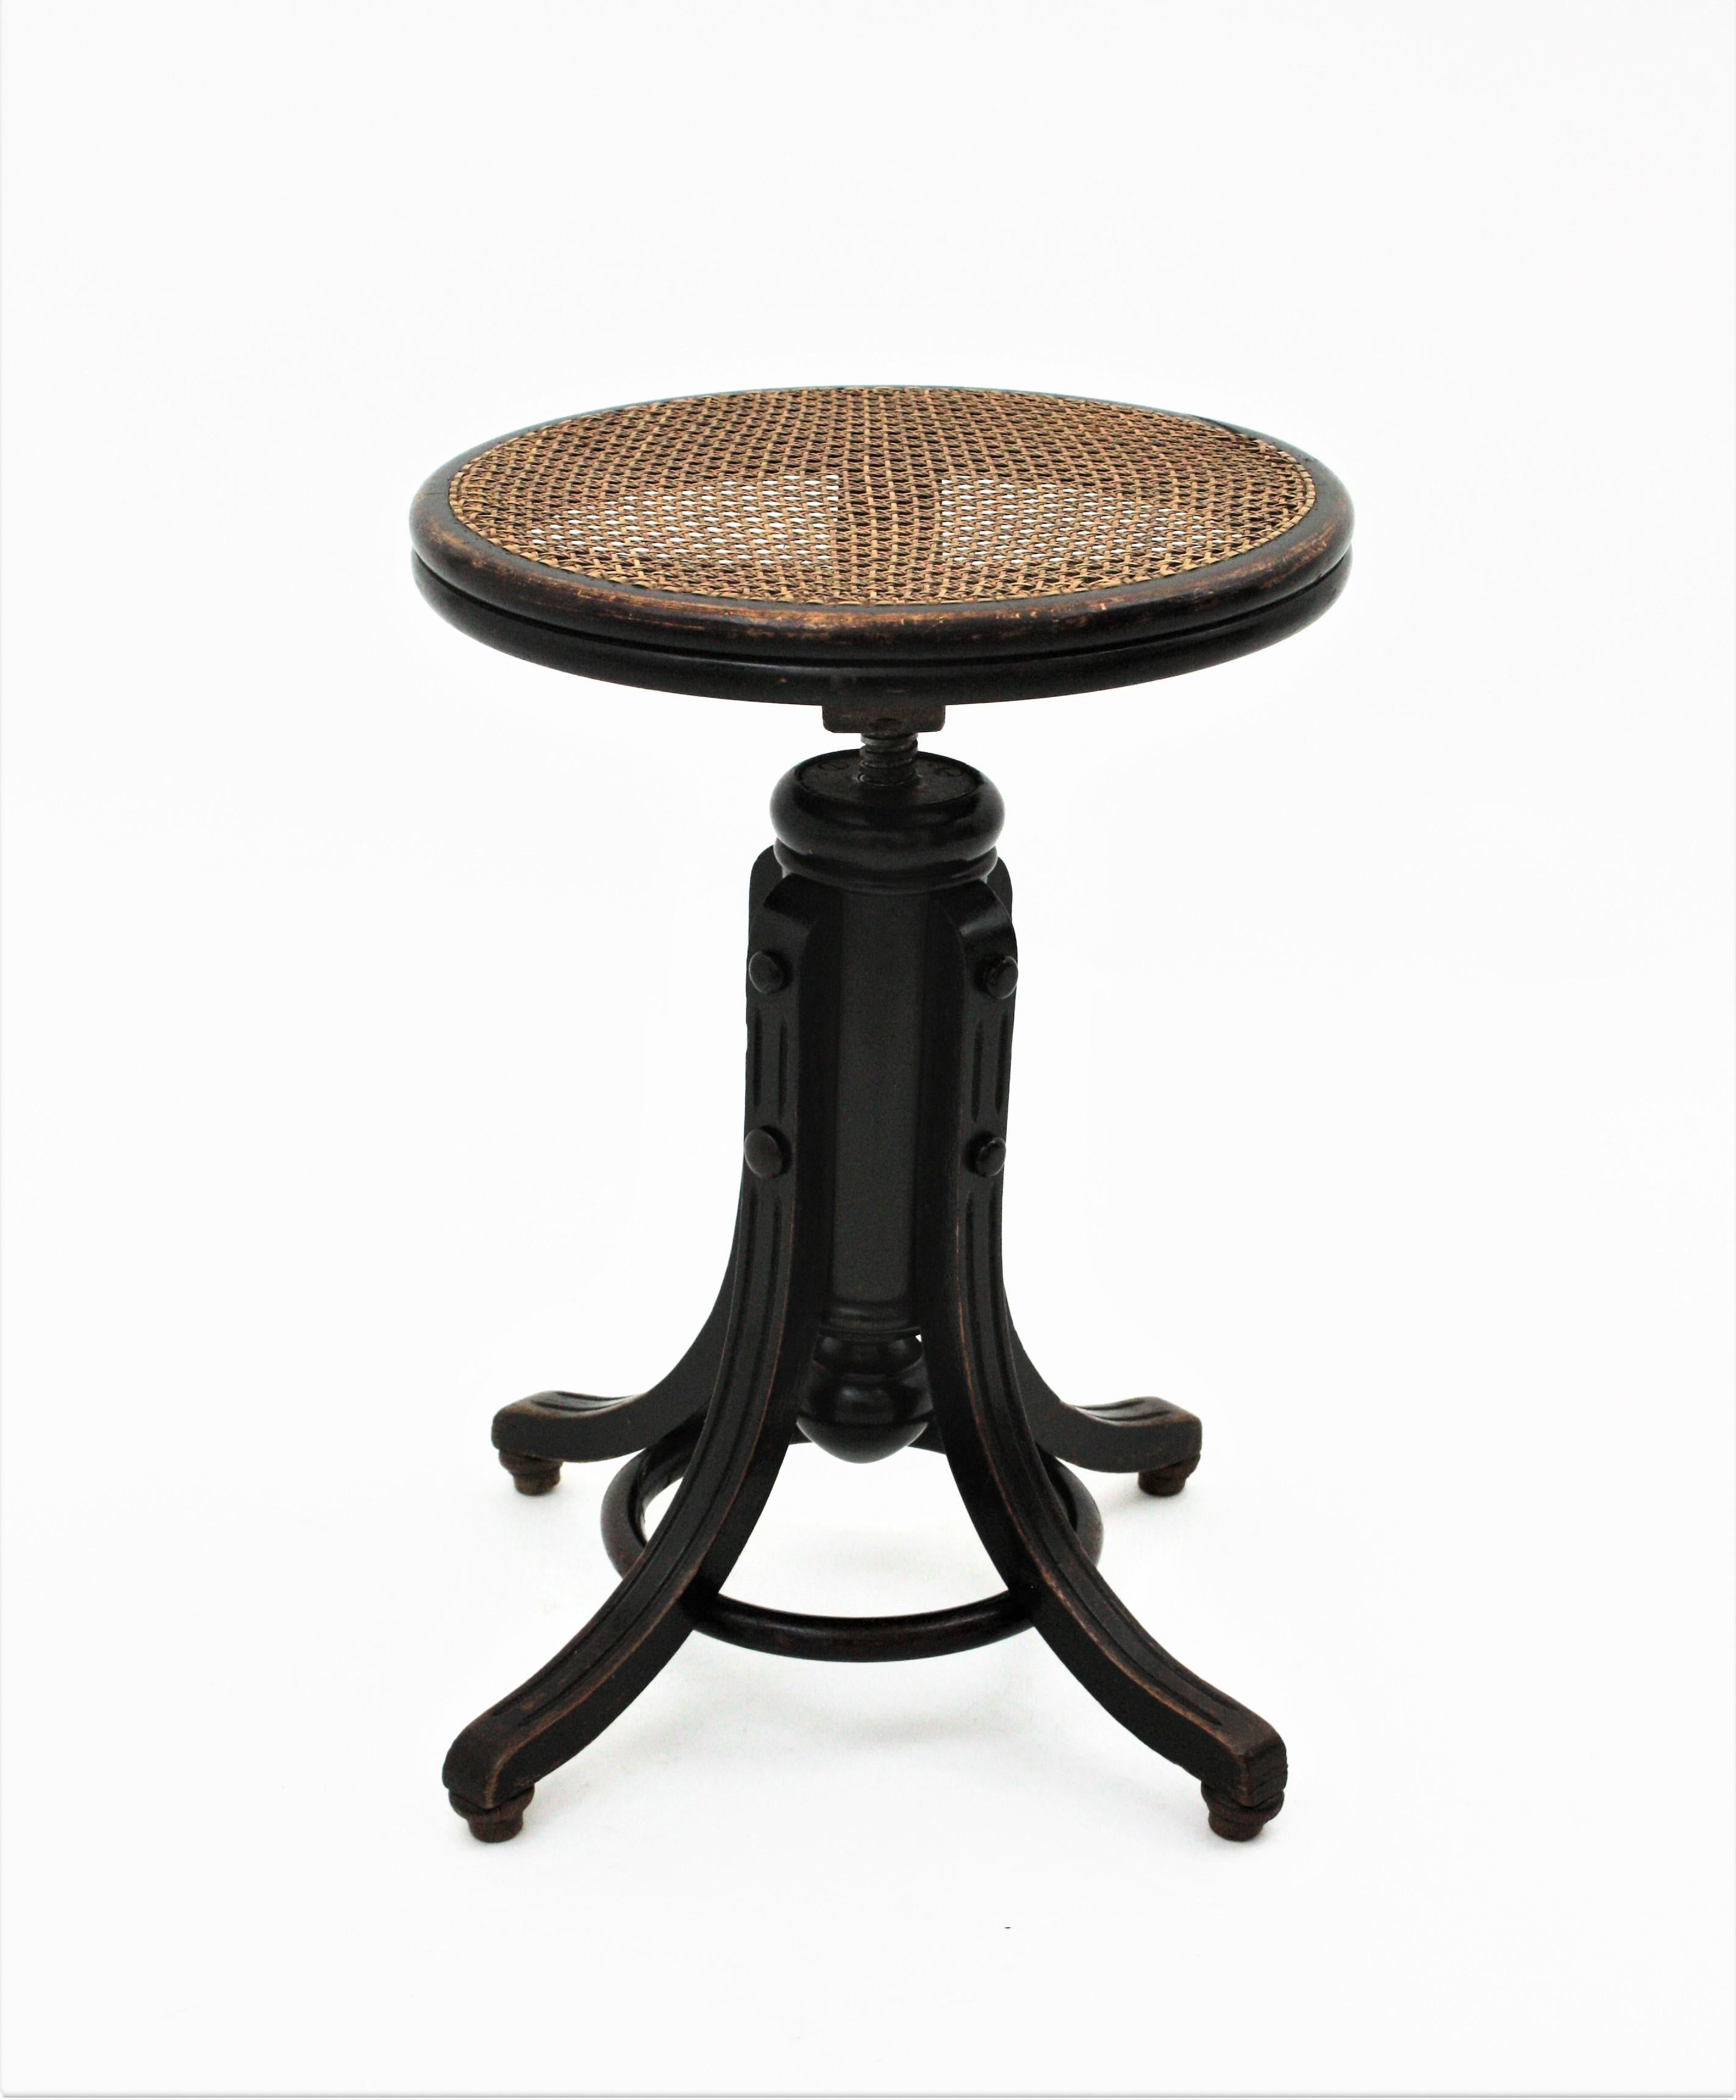 Thonet Style Revolving Stool with Cane Seat For Sale 6